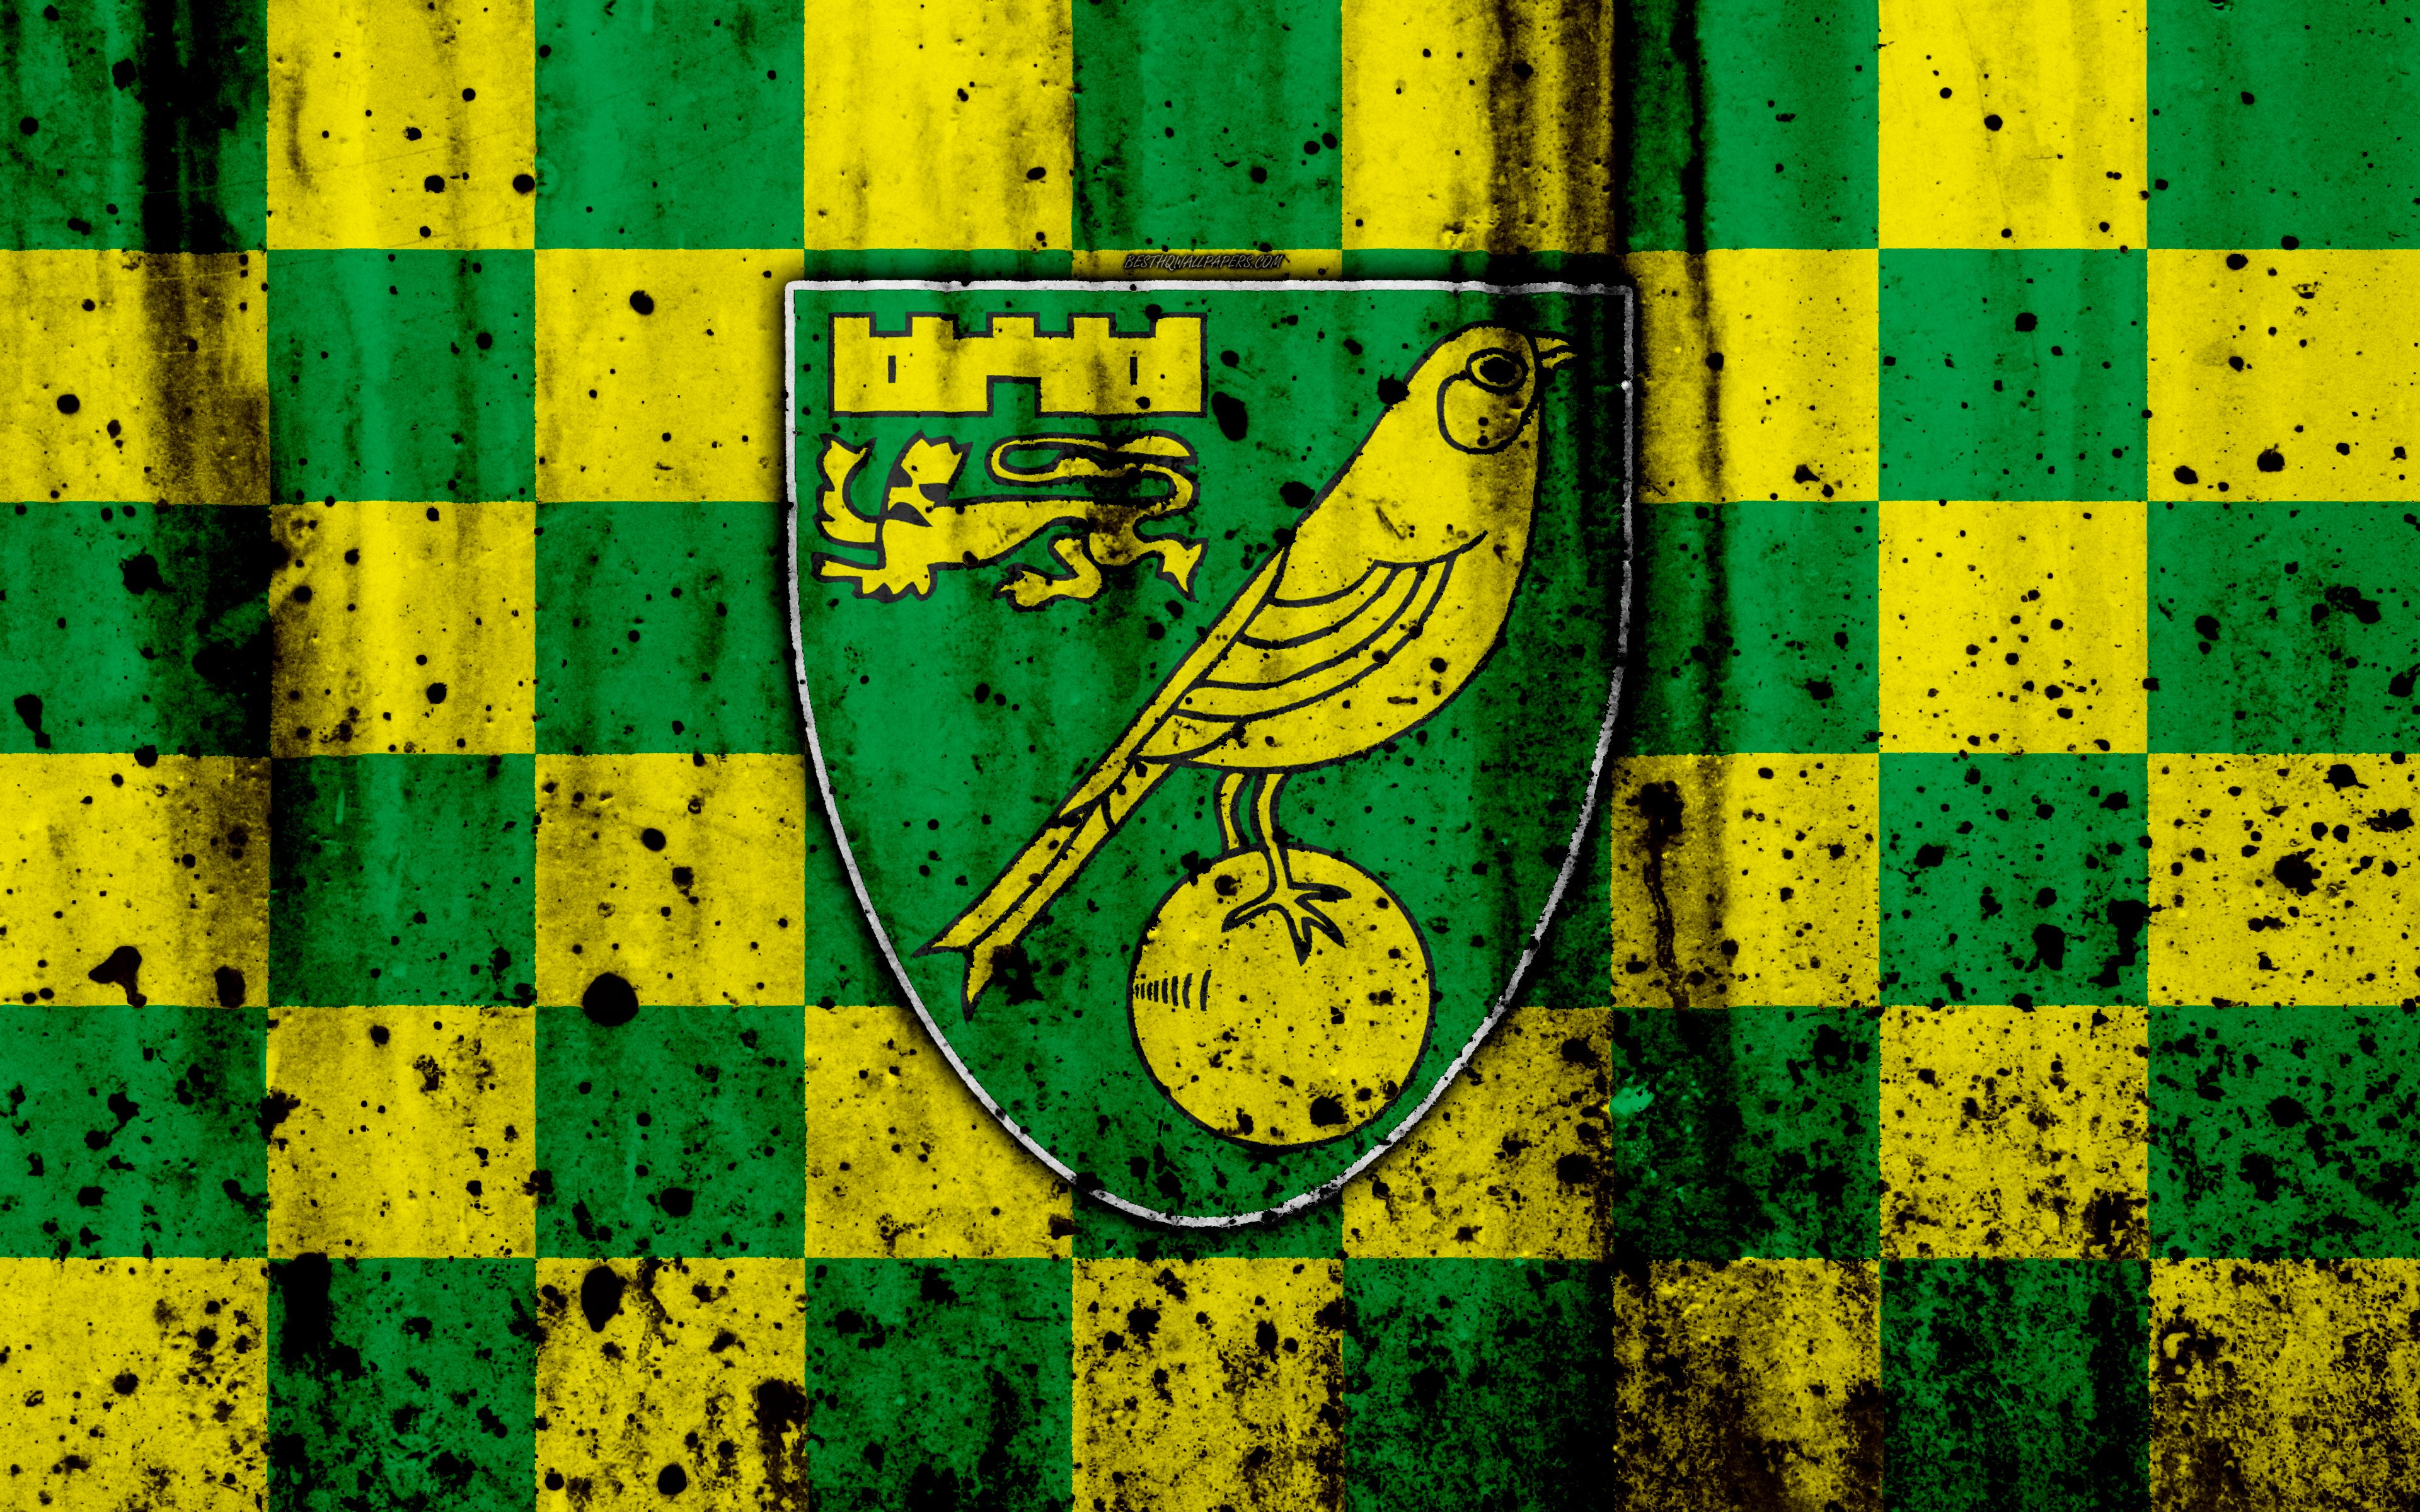 Download wallpaper 4k, FC Norwich City, grunge, EFL Championship, art, soccer, football club, England, Norwich City, logo, stone texture, Norwich City FC for desktop with resolution 3840x2400. High Quality HD picture wallpaper